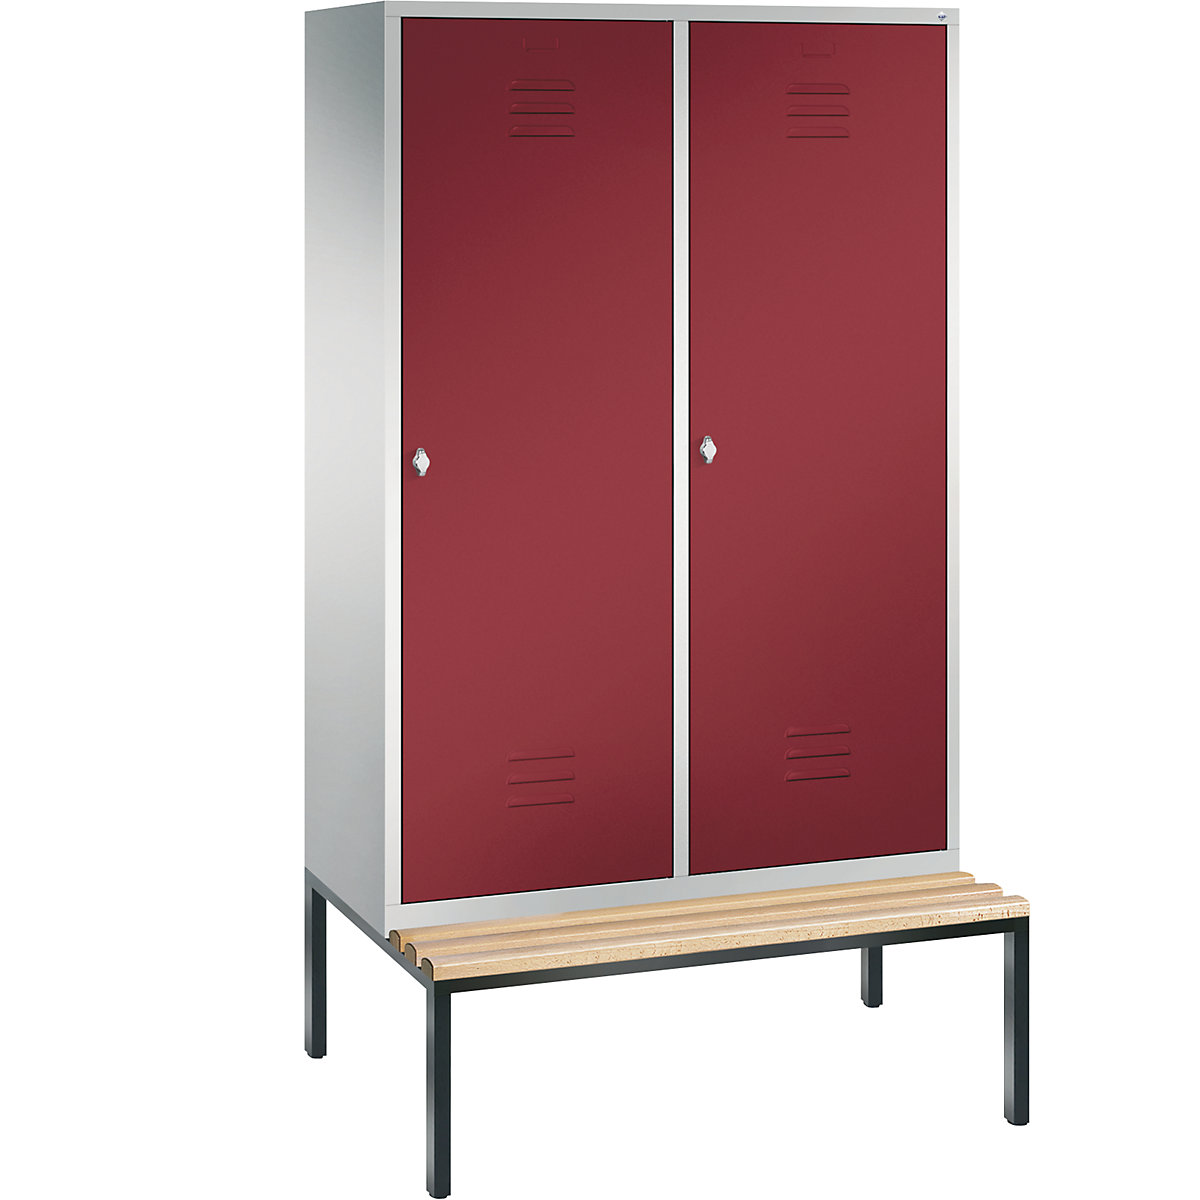 CLASSIC cloakroom locker with bench mounted underneath, door for 2 compartments – C+P